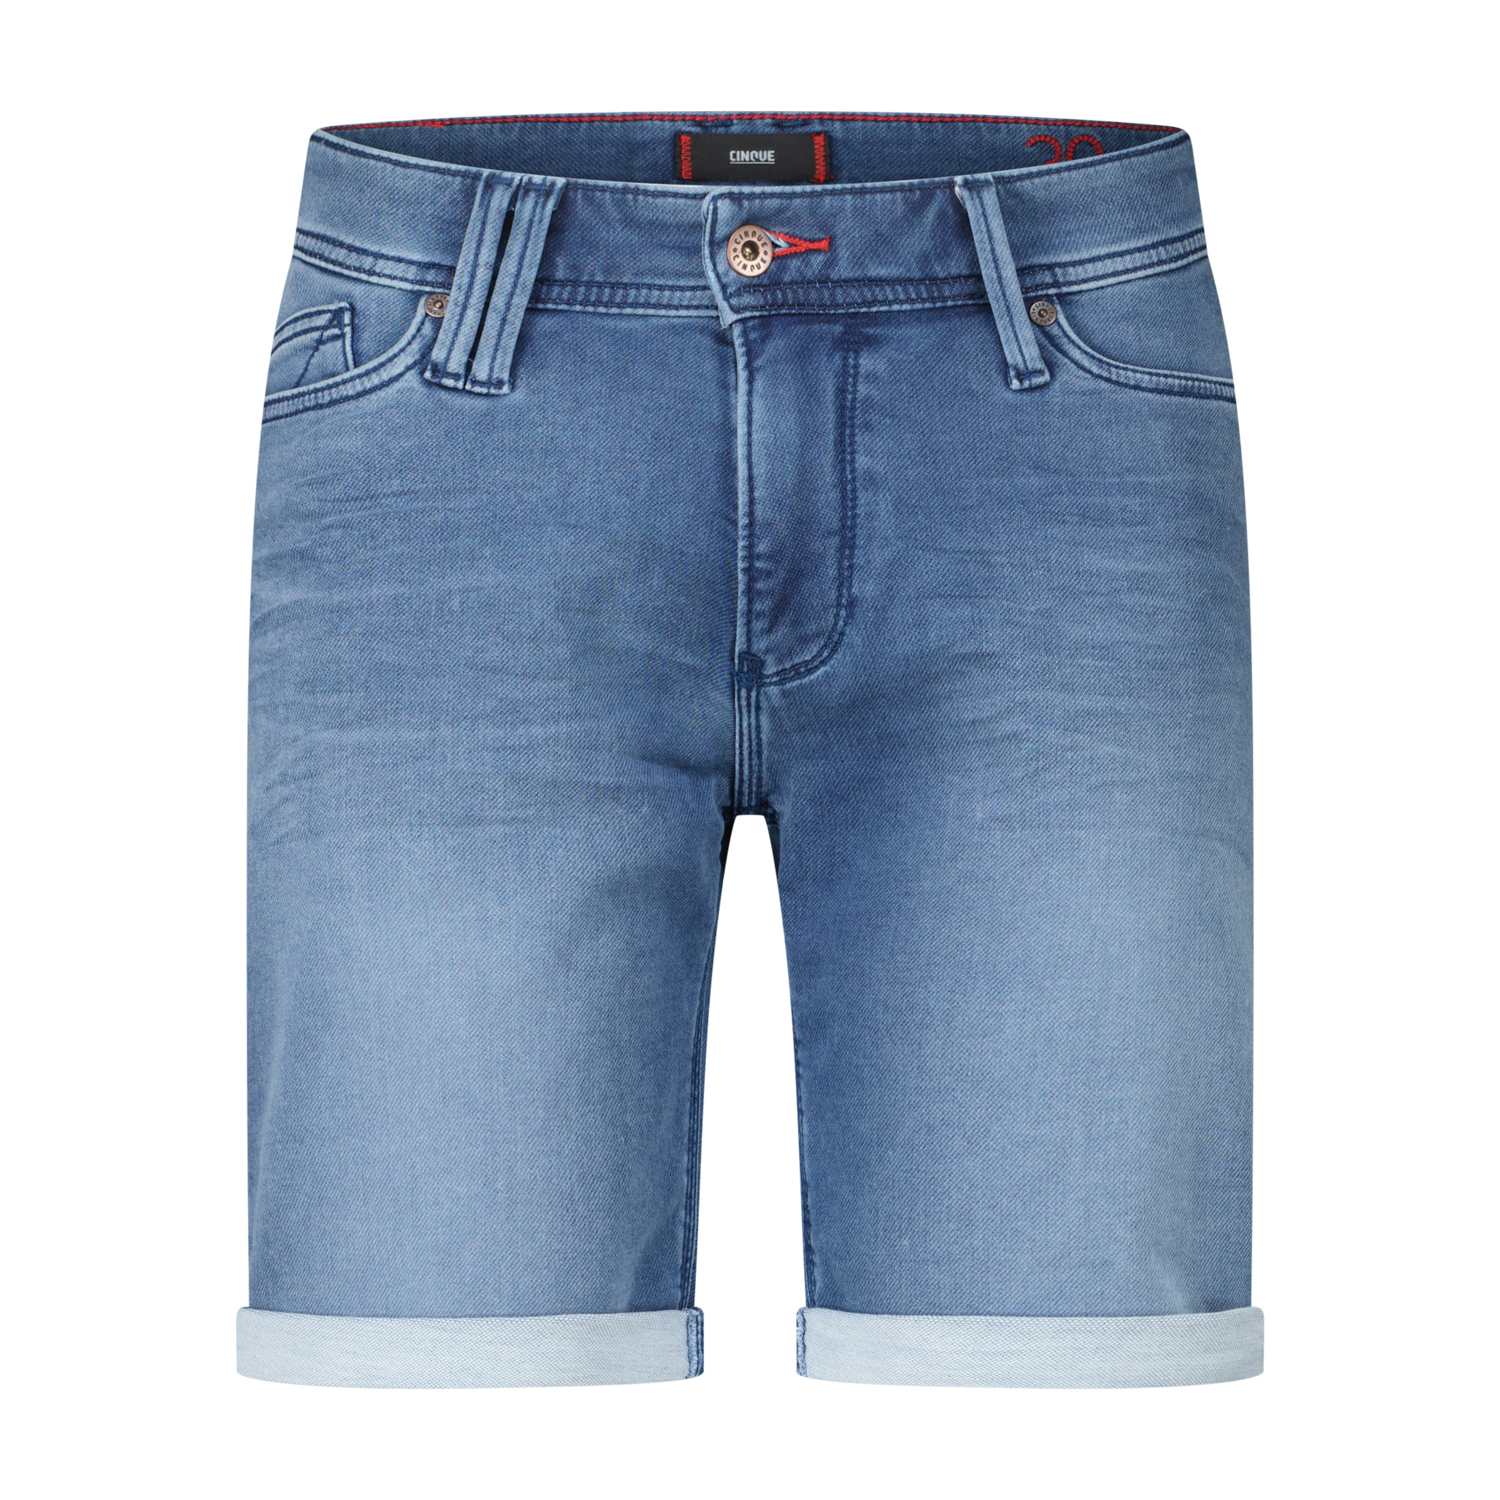 Tapred-Fit Jeans Shorts